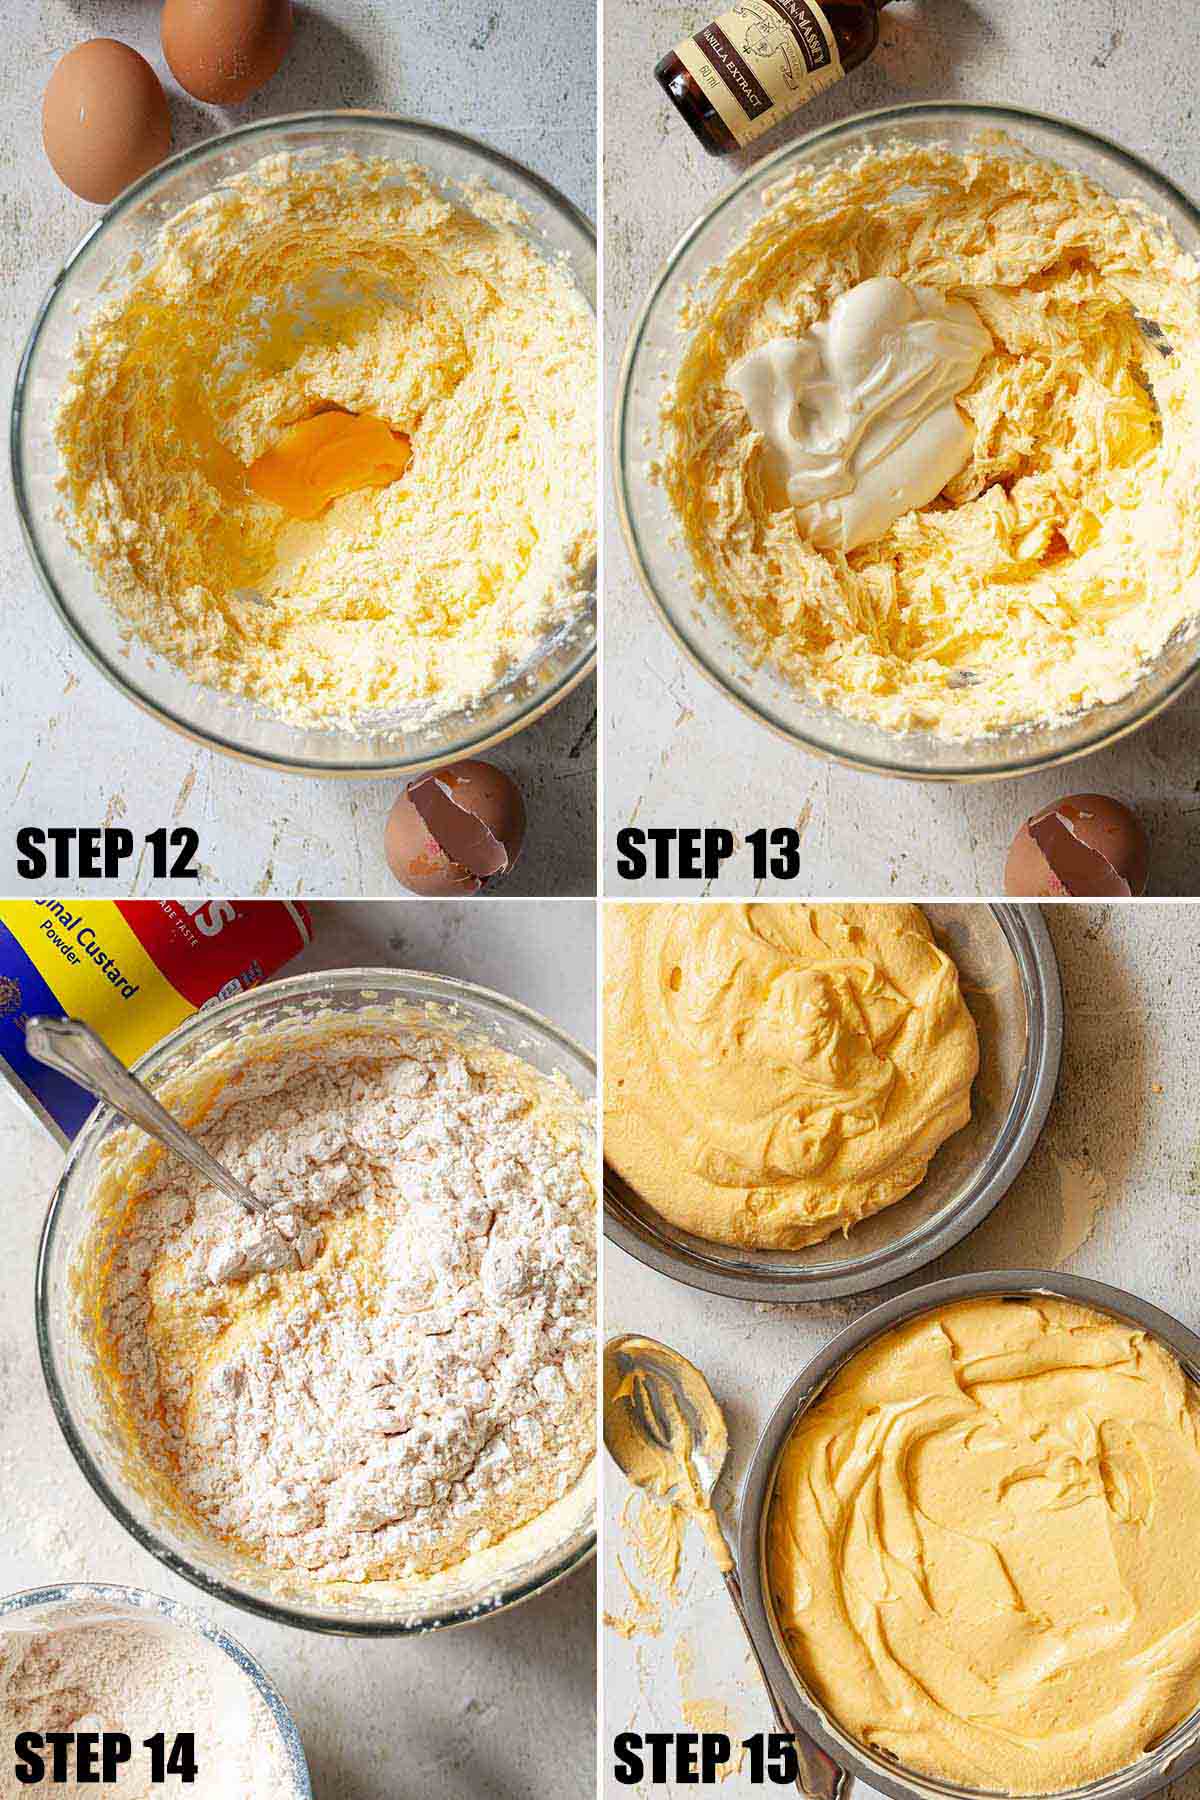 Collage of images showing yellow sponge batter being made.